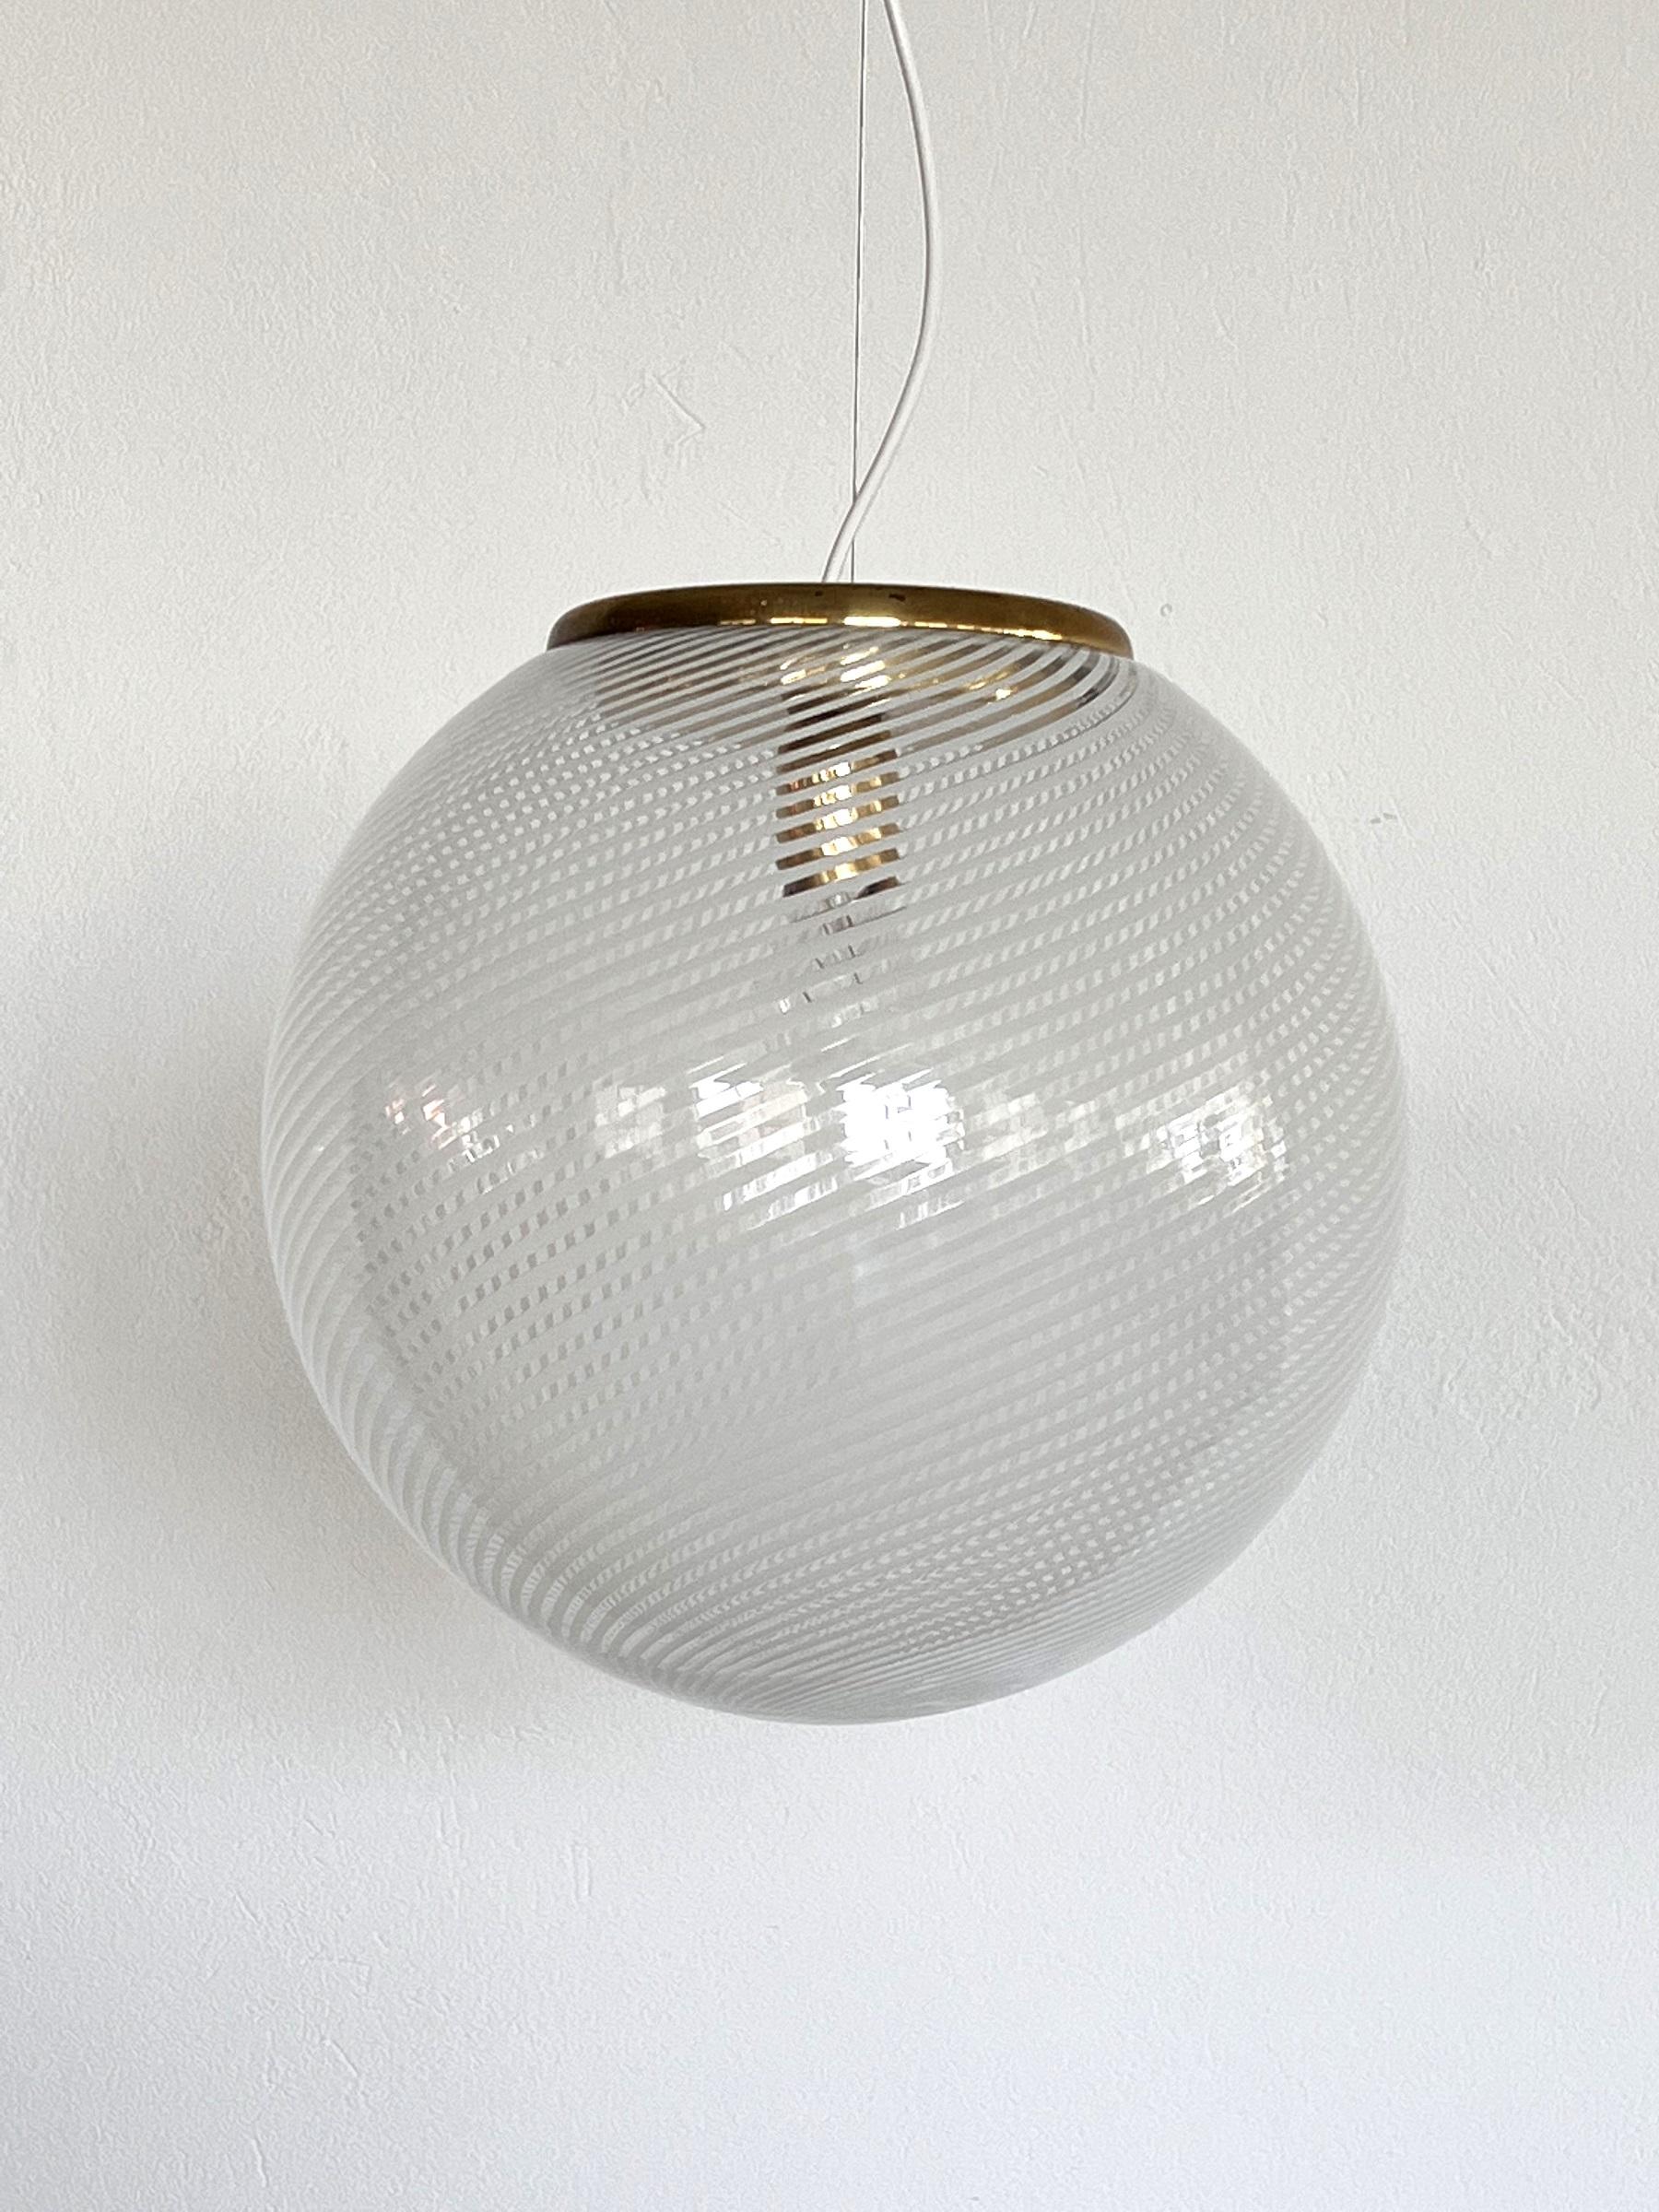 Gorgeous pendant light with large murano glass globe and brass detail.
Made in Italy in the 1970s.
The beautiful glass globe presents shiny white stripes on transparent glass ground. 
When illuminated, leaves gorgeous shadows on the near wall /